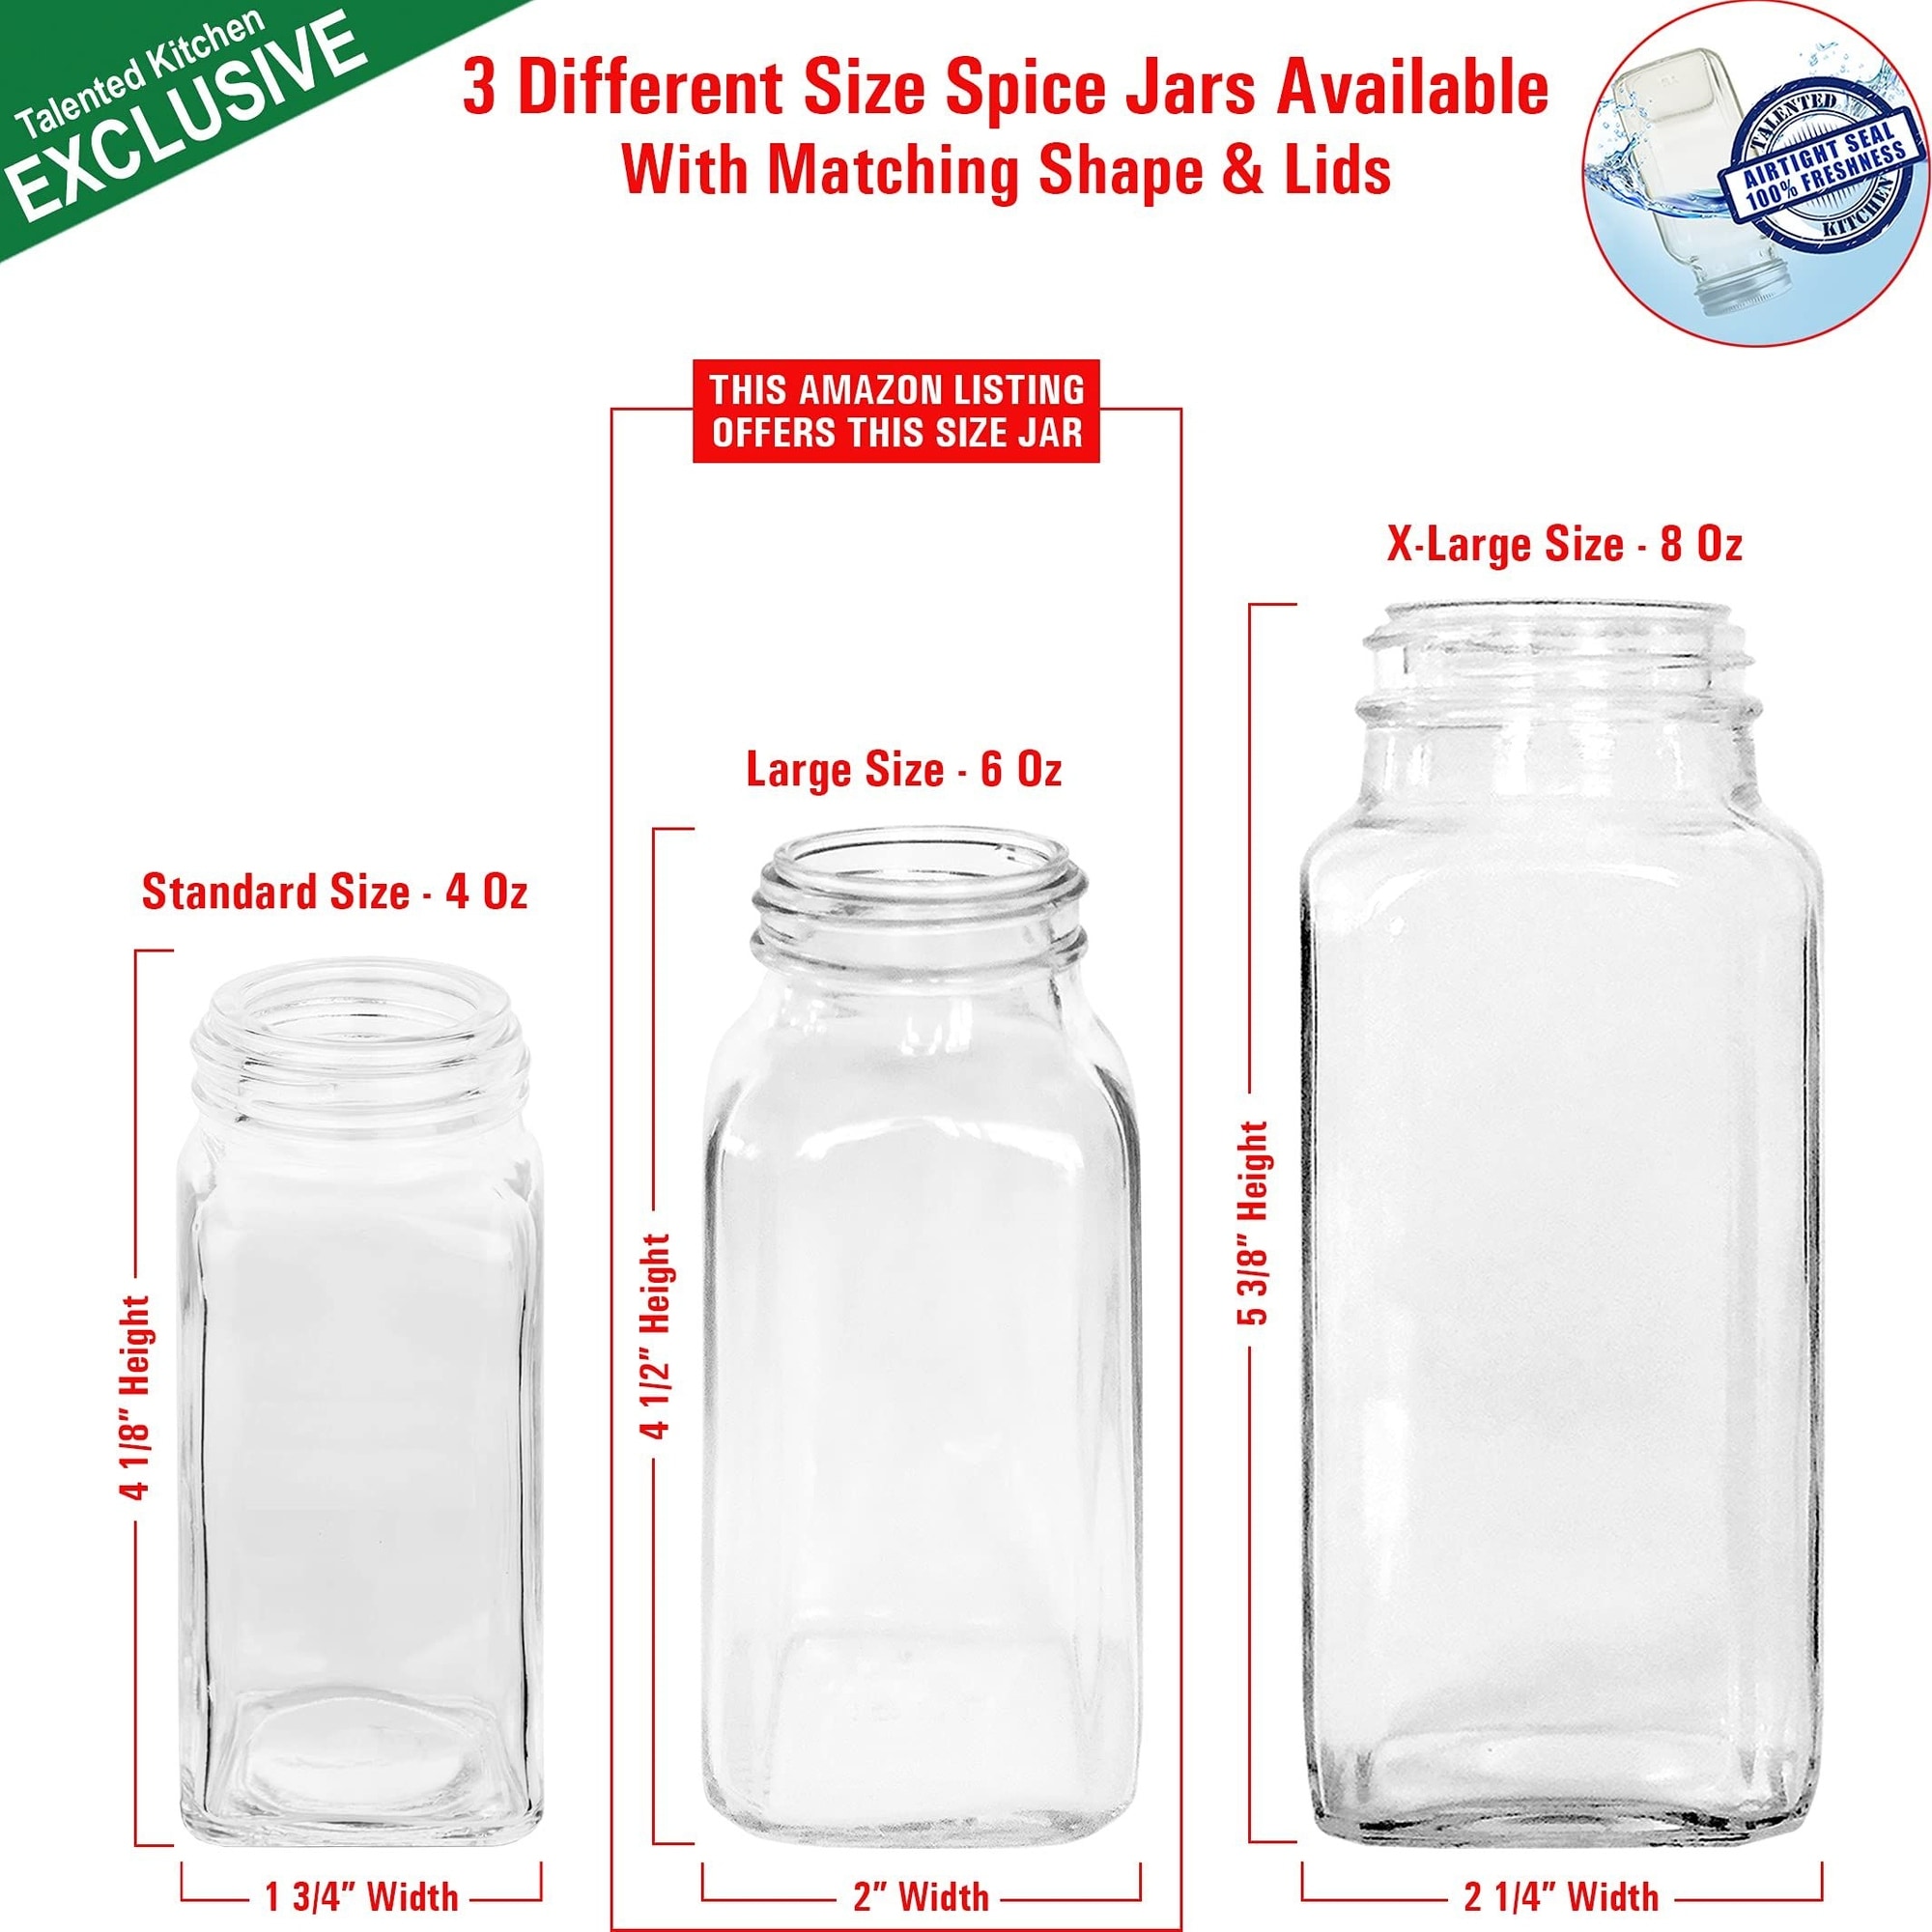 Talented Kitchen 24 Pack Glass Spice Jars with 284 Preprinted